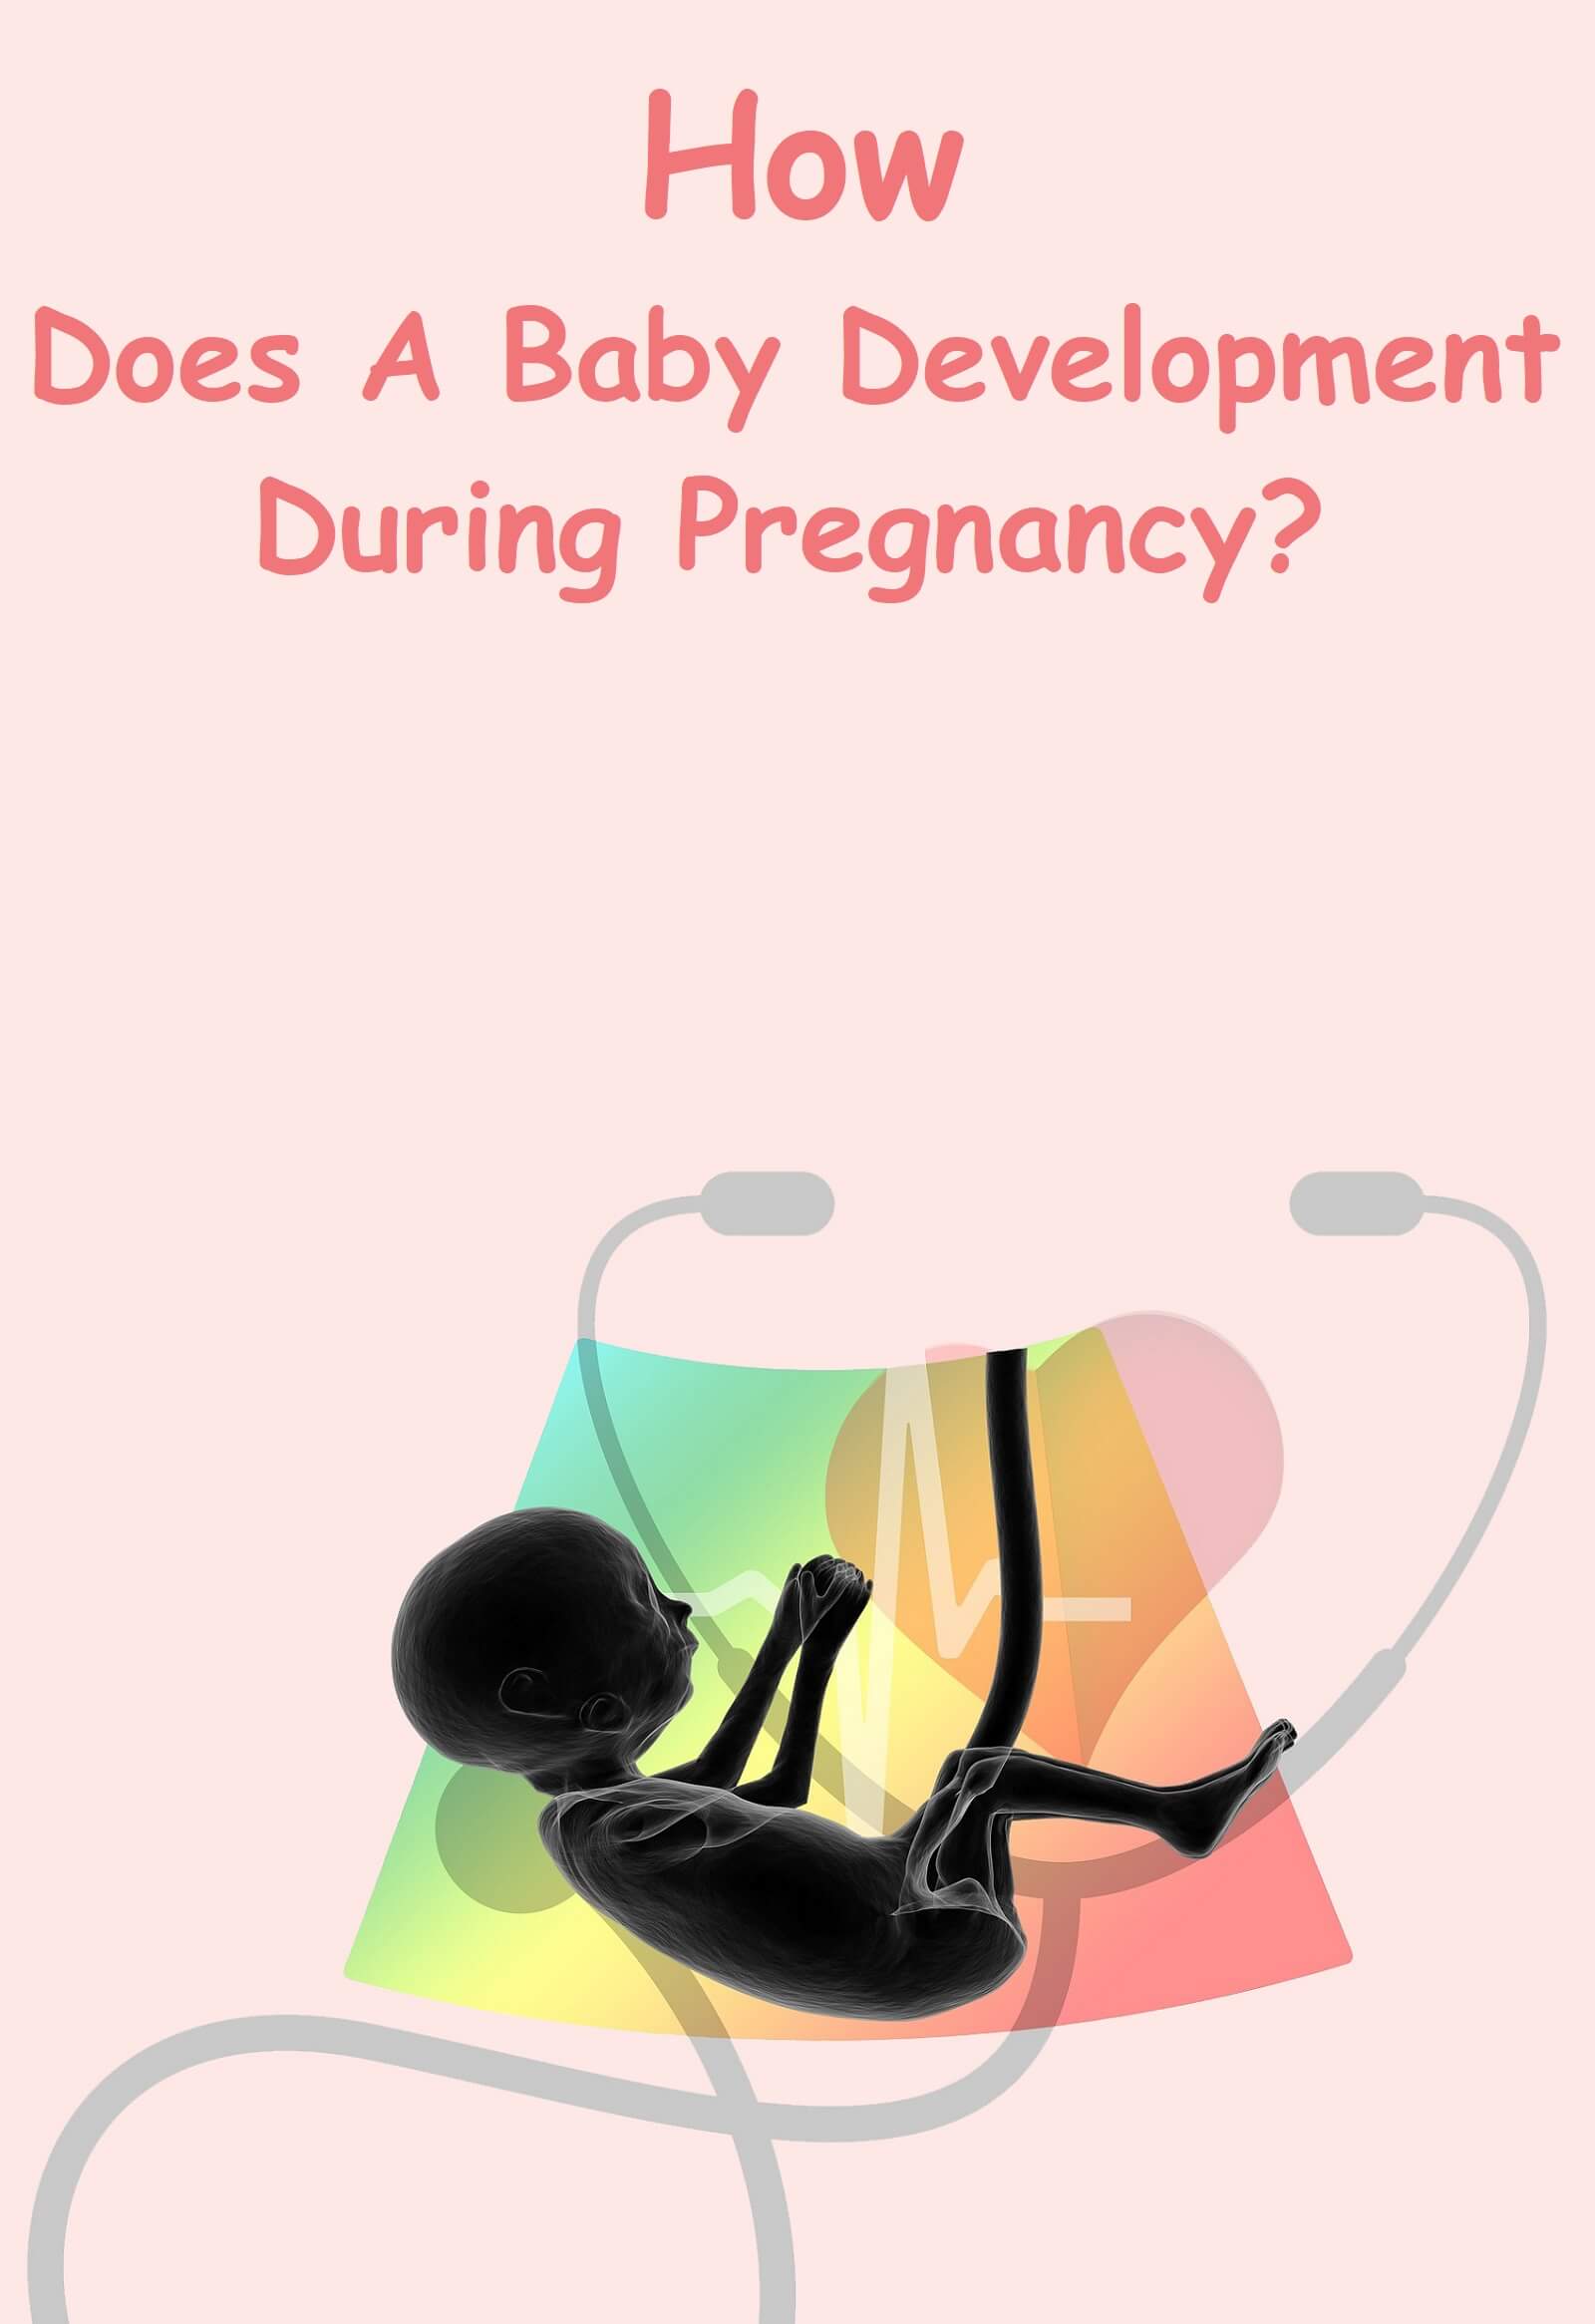 how does baby development in trimester during pregnancy